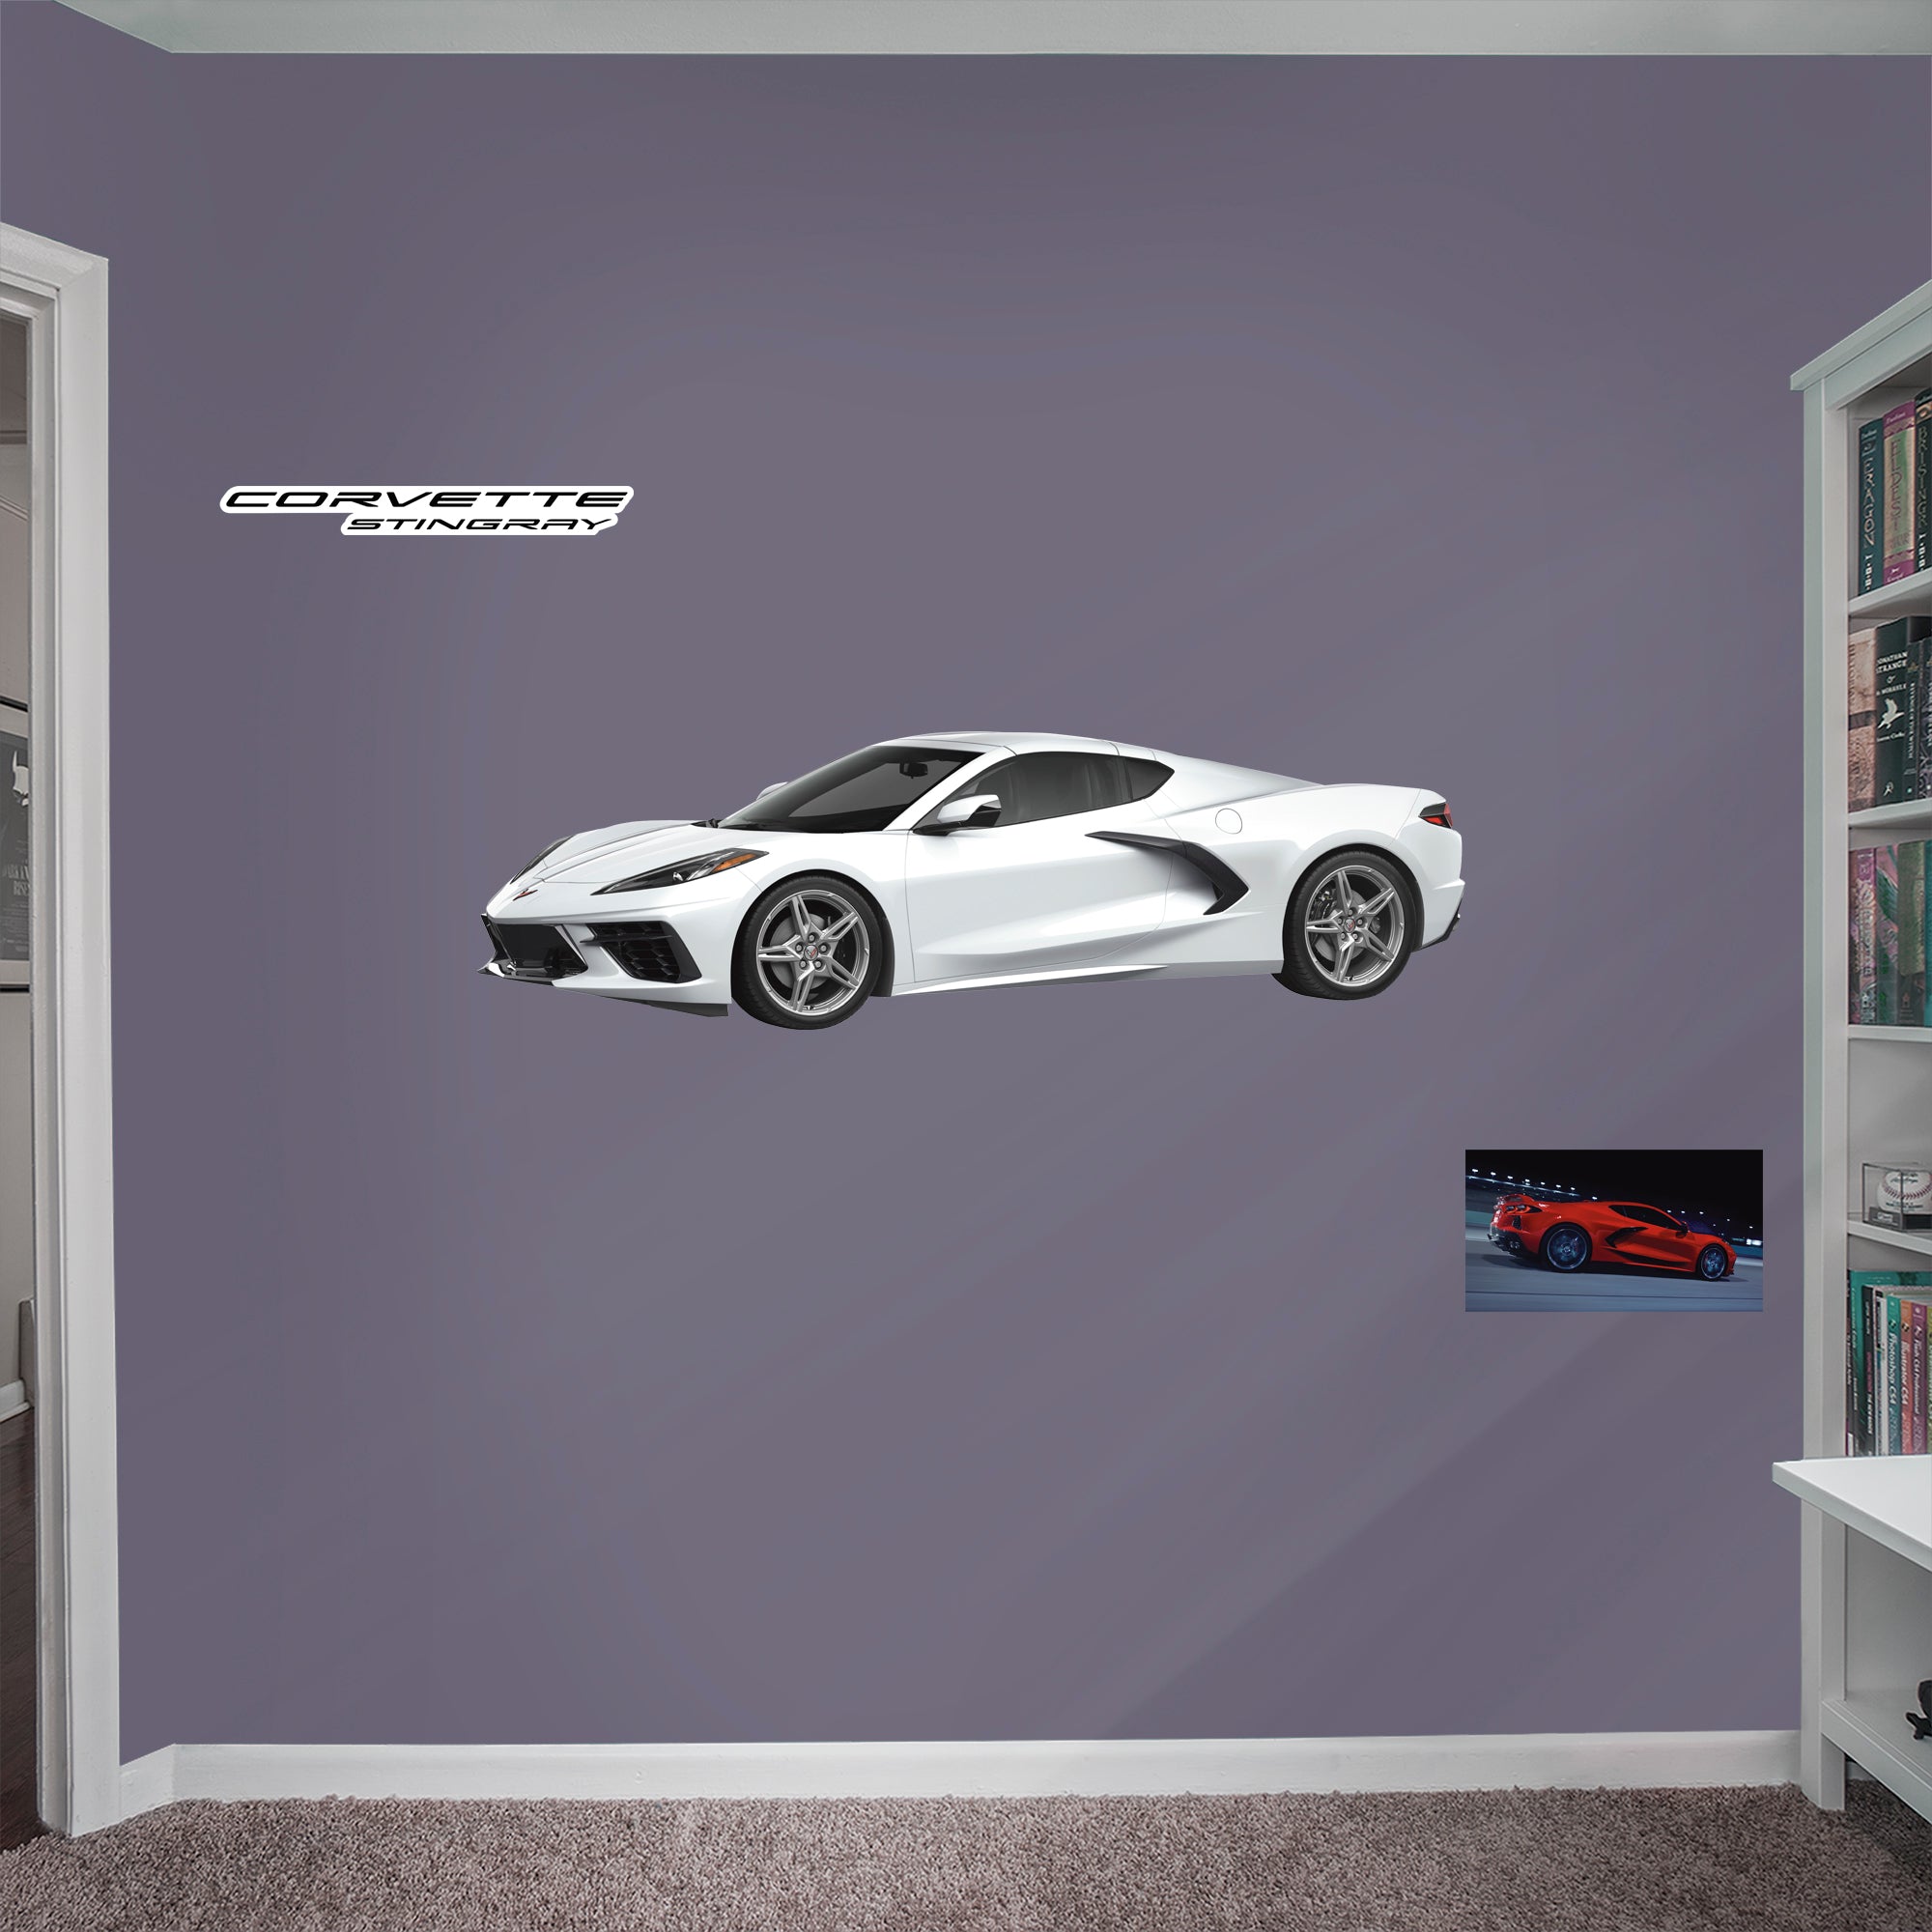 Chevrolet Corvette White Stingray: Officially Licensed GM Removable Wall Decal Life-Size + 2 Decals by Fathead | Vinyl